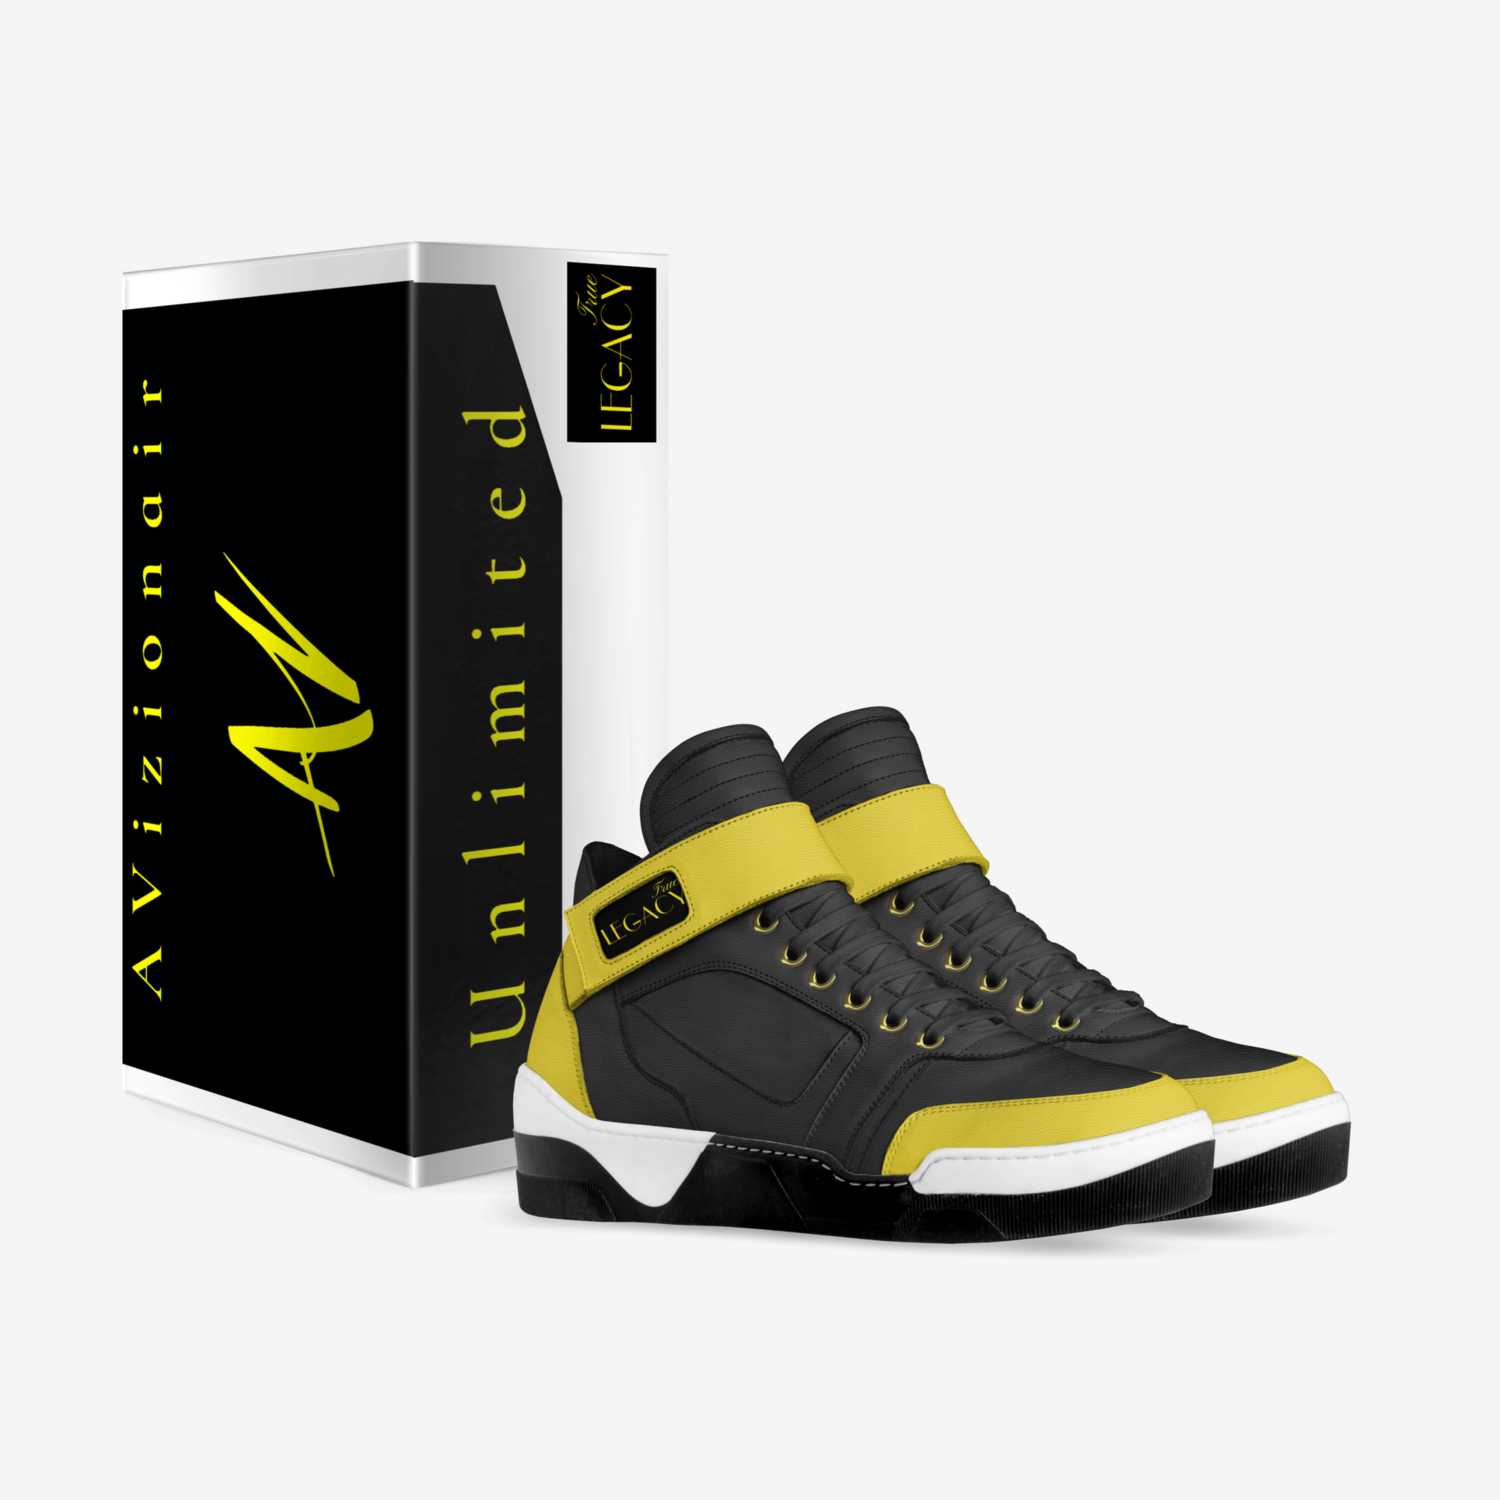 True Legacy custom made in Italy shoes by Avizionair Unlimited | Box view